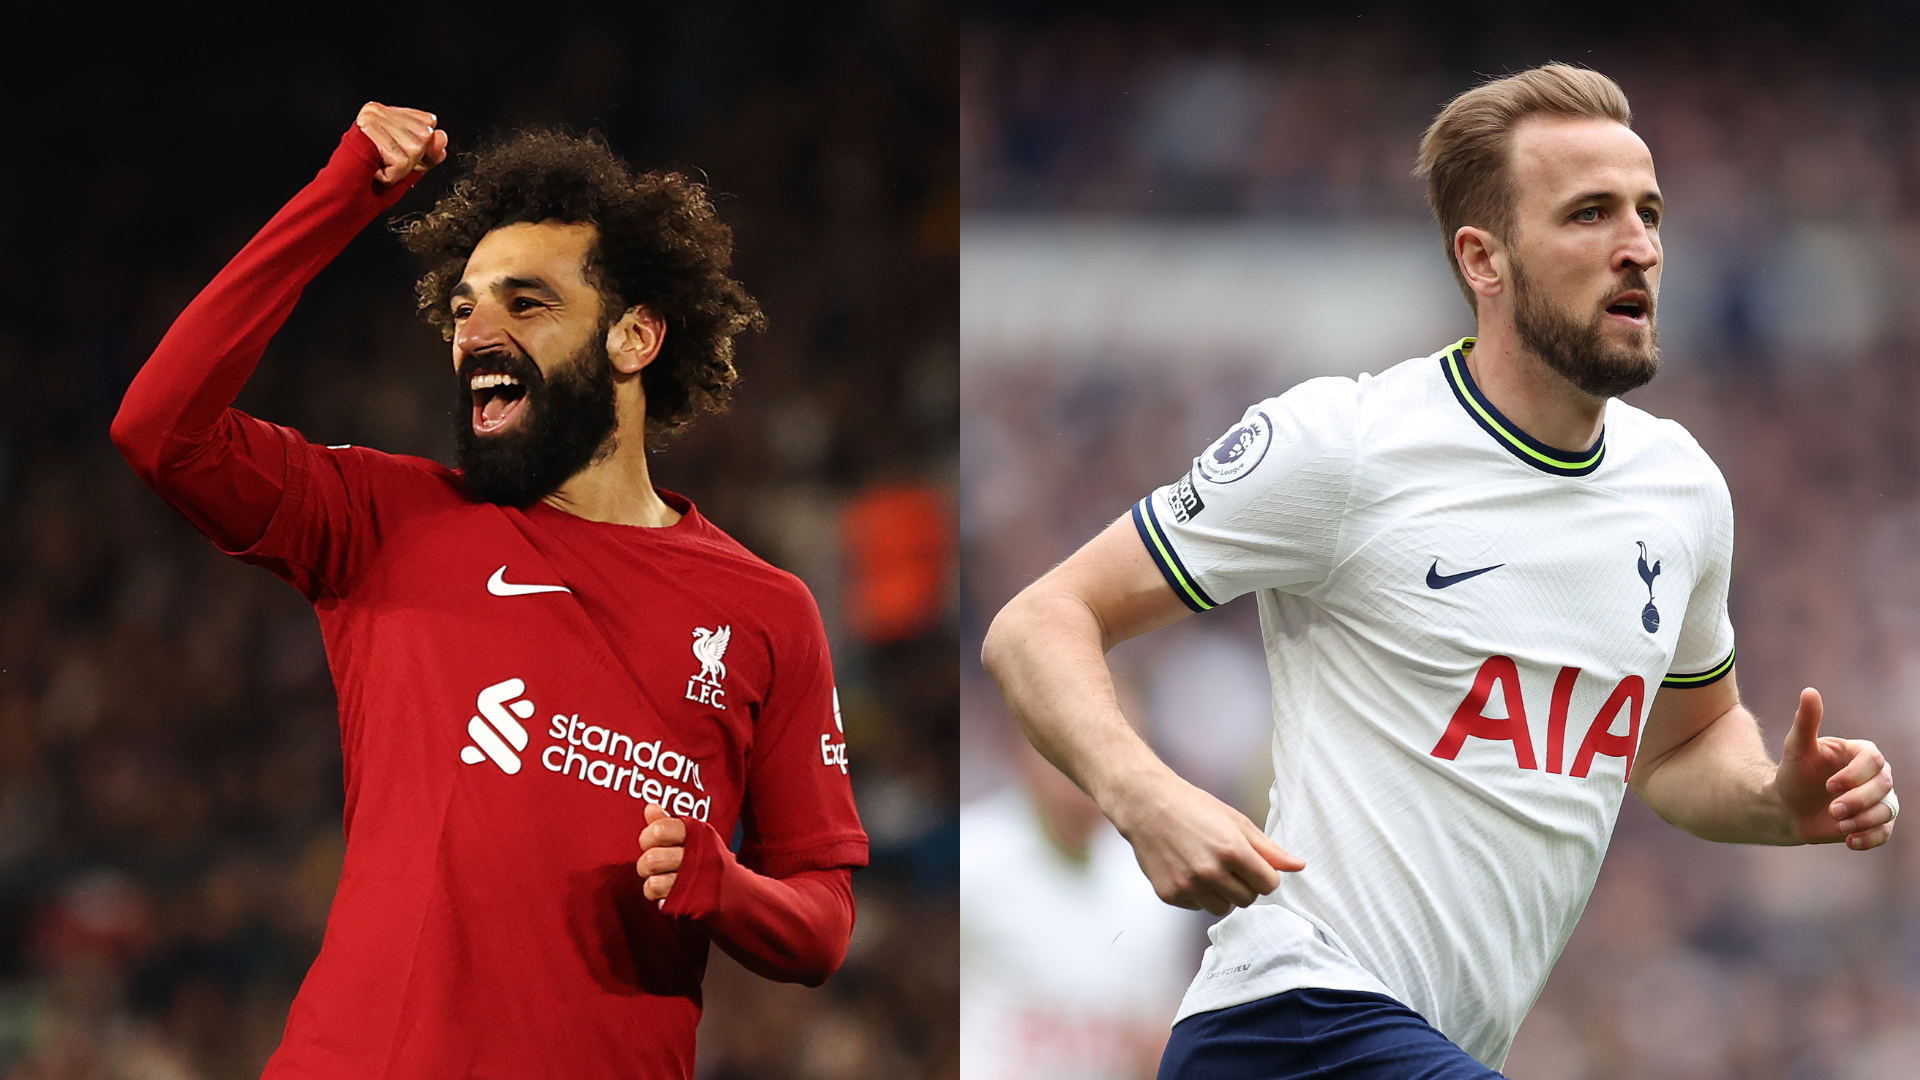 Liverpool vs Tottenham Where to watch the match online, live stream, TV channels and kick-off time Goal US